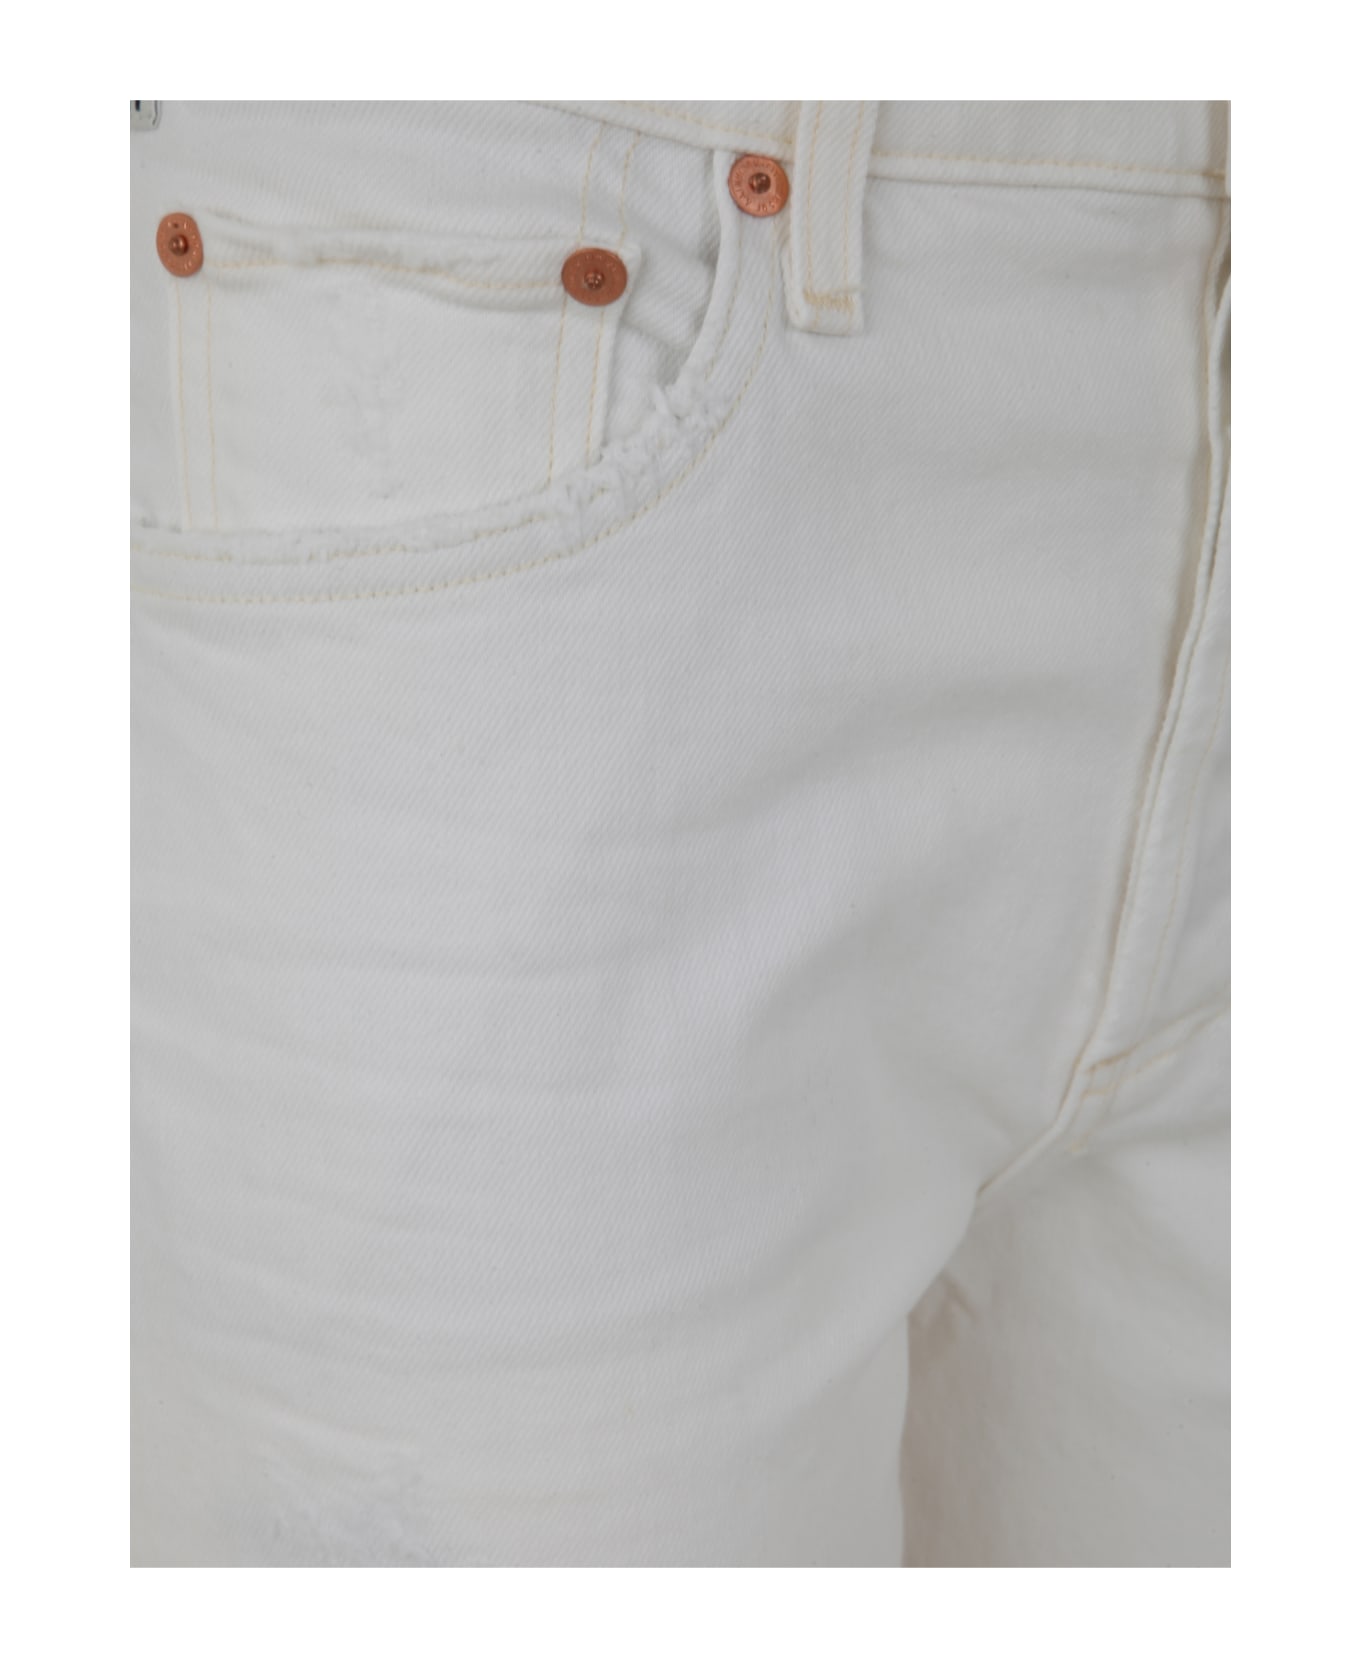 Citizens of Humanity Florence Wide Straight Jeans - Chntl Chantilly Soft White